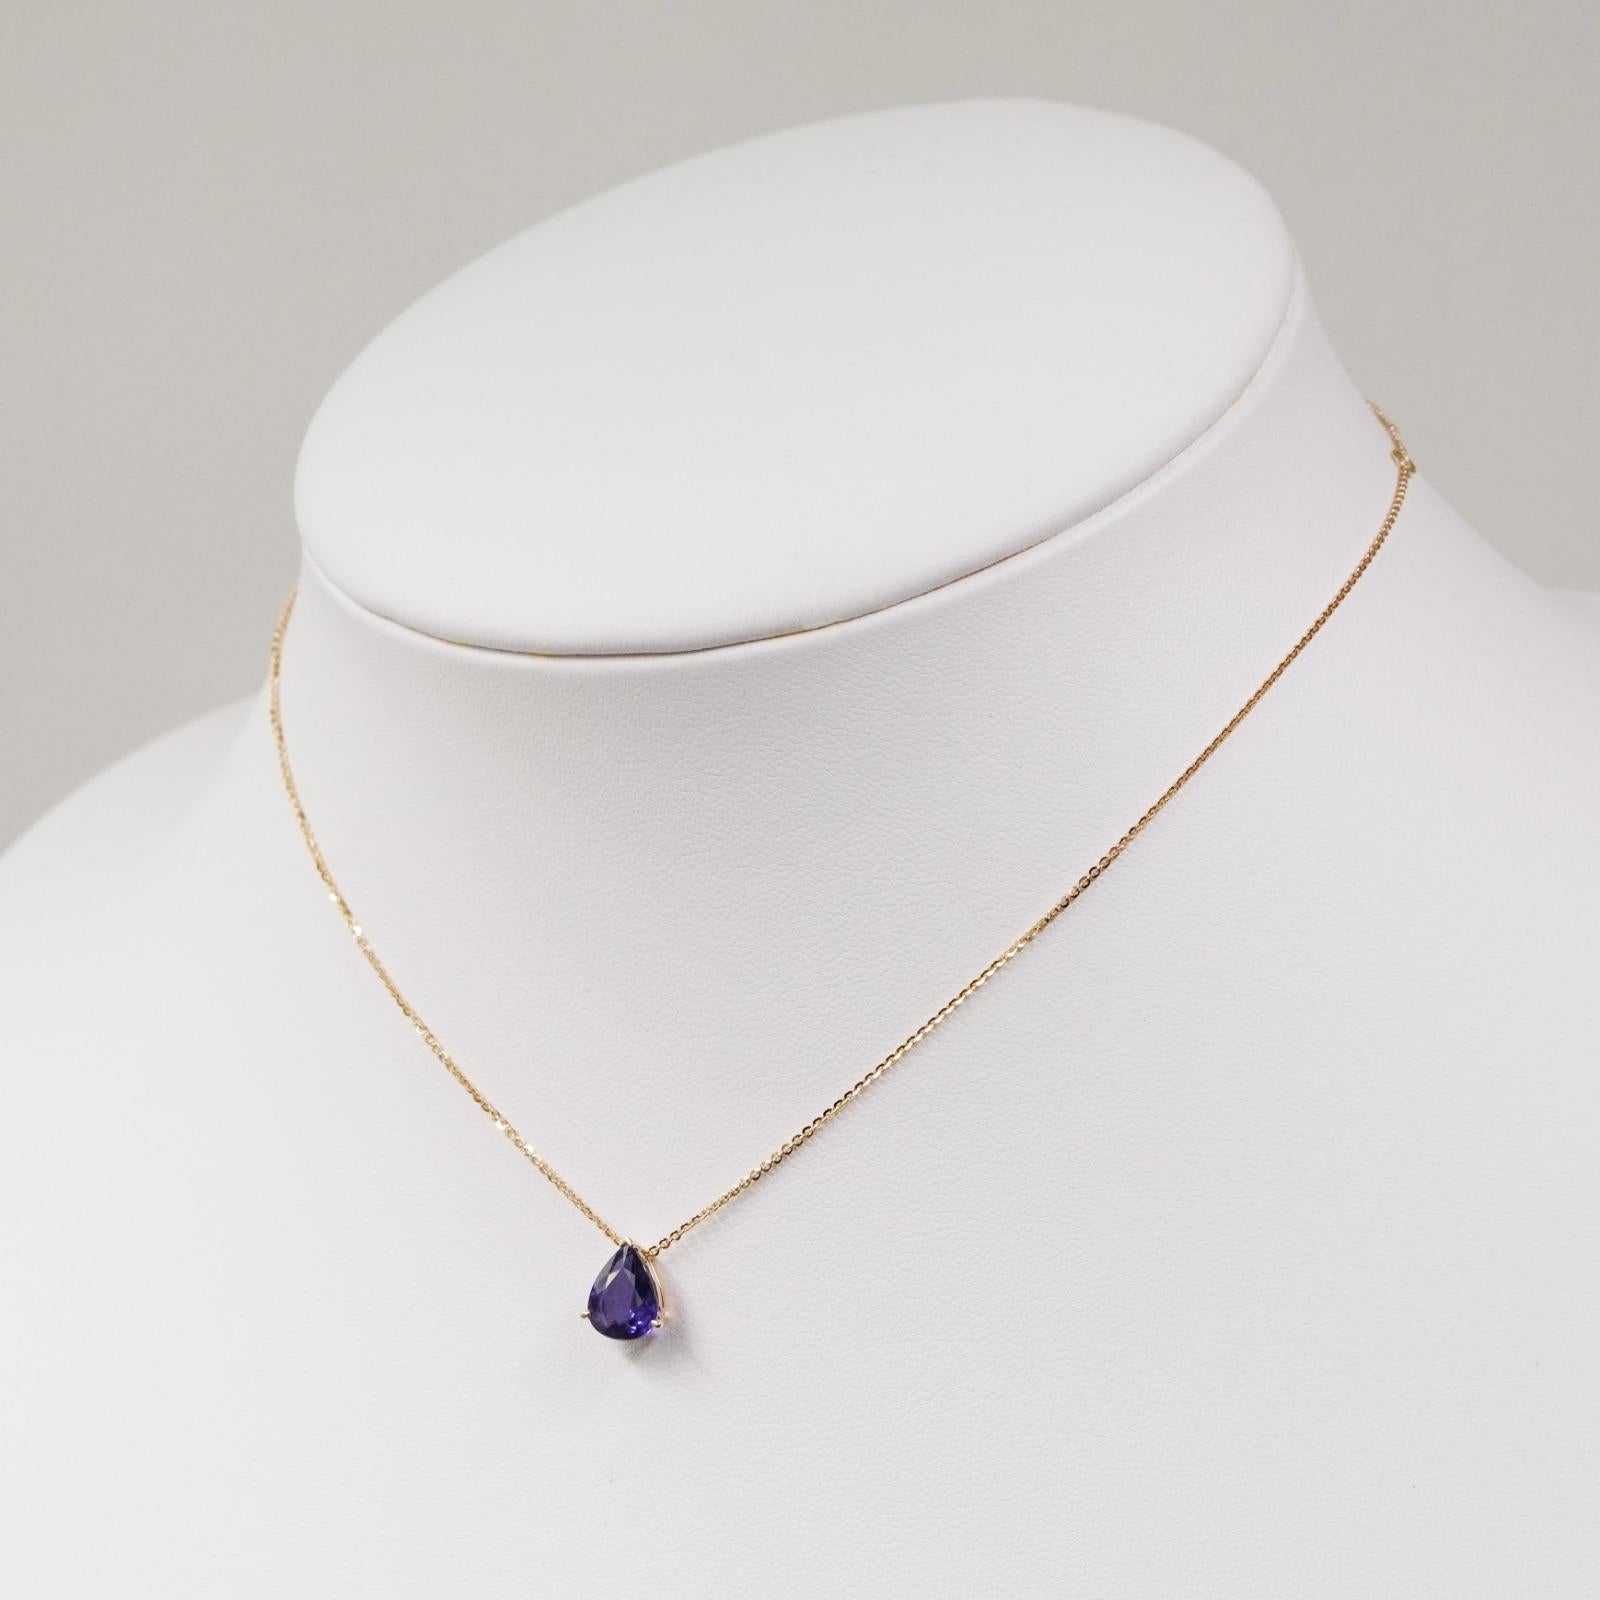 Pear Cut 18K Yellow Gold Necklace With Sapphire 2.24 ct. For Sale